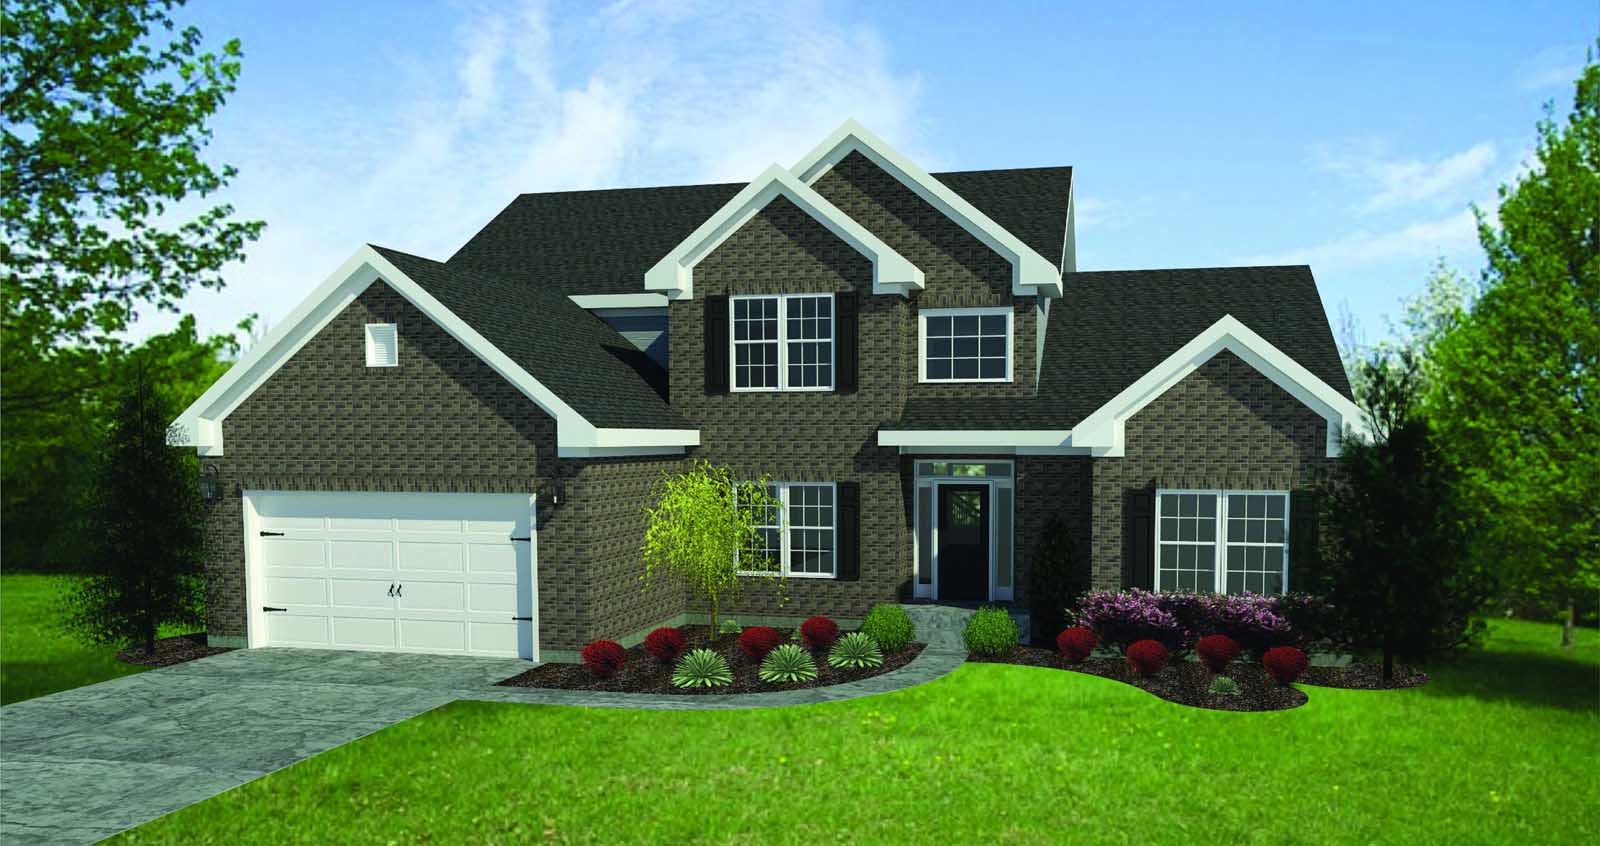 Design Homes The Triple Crown elevation A